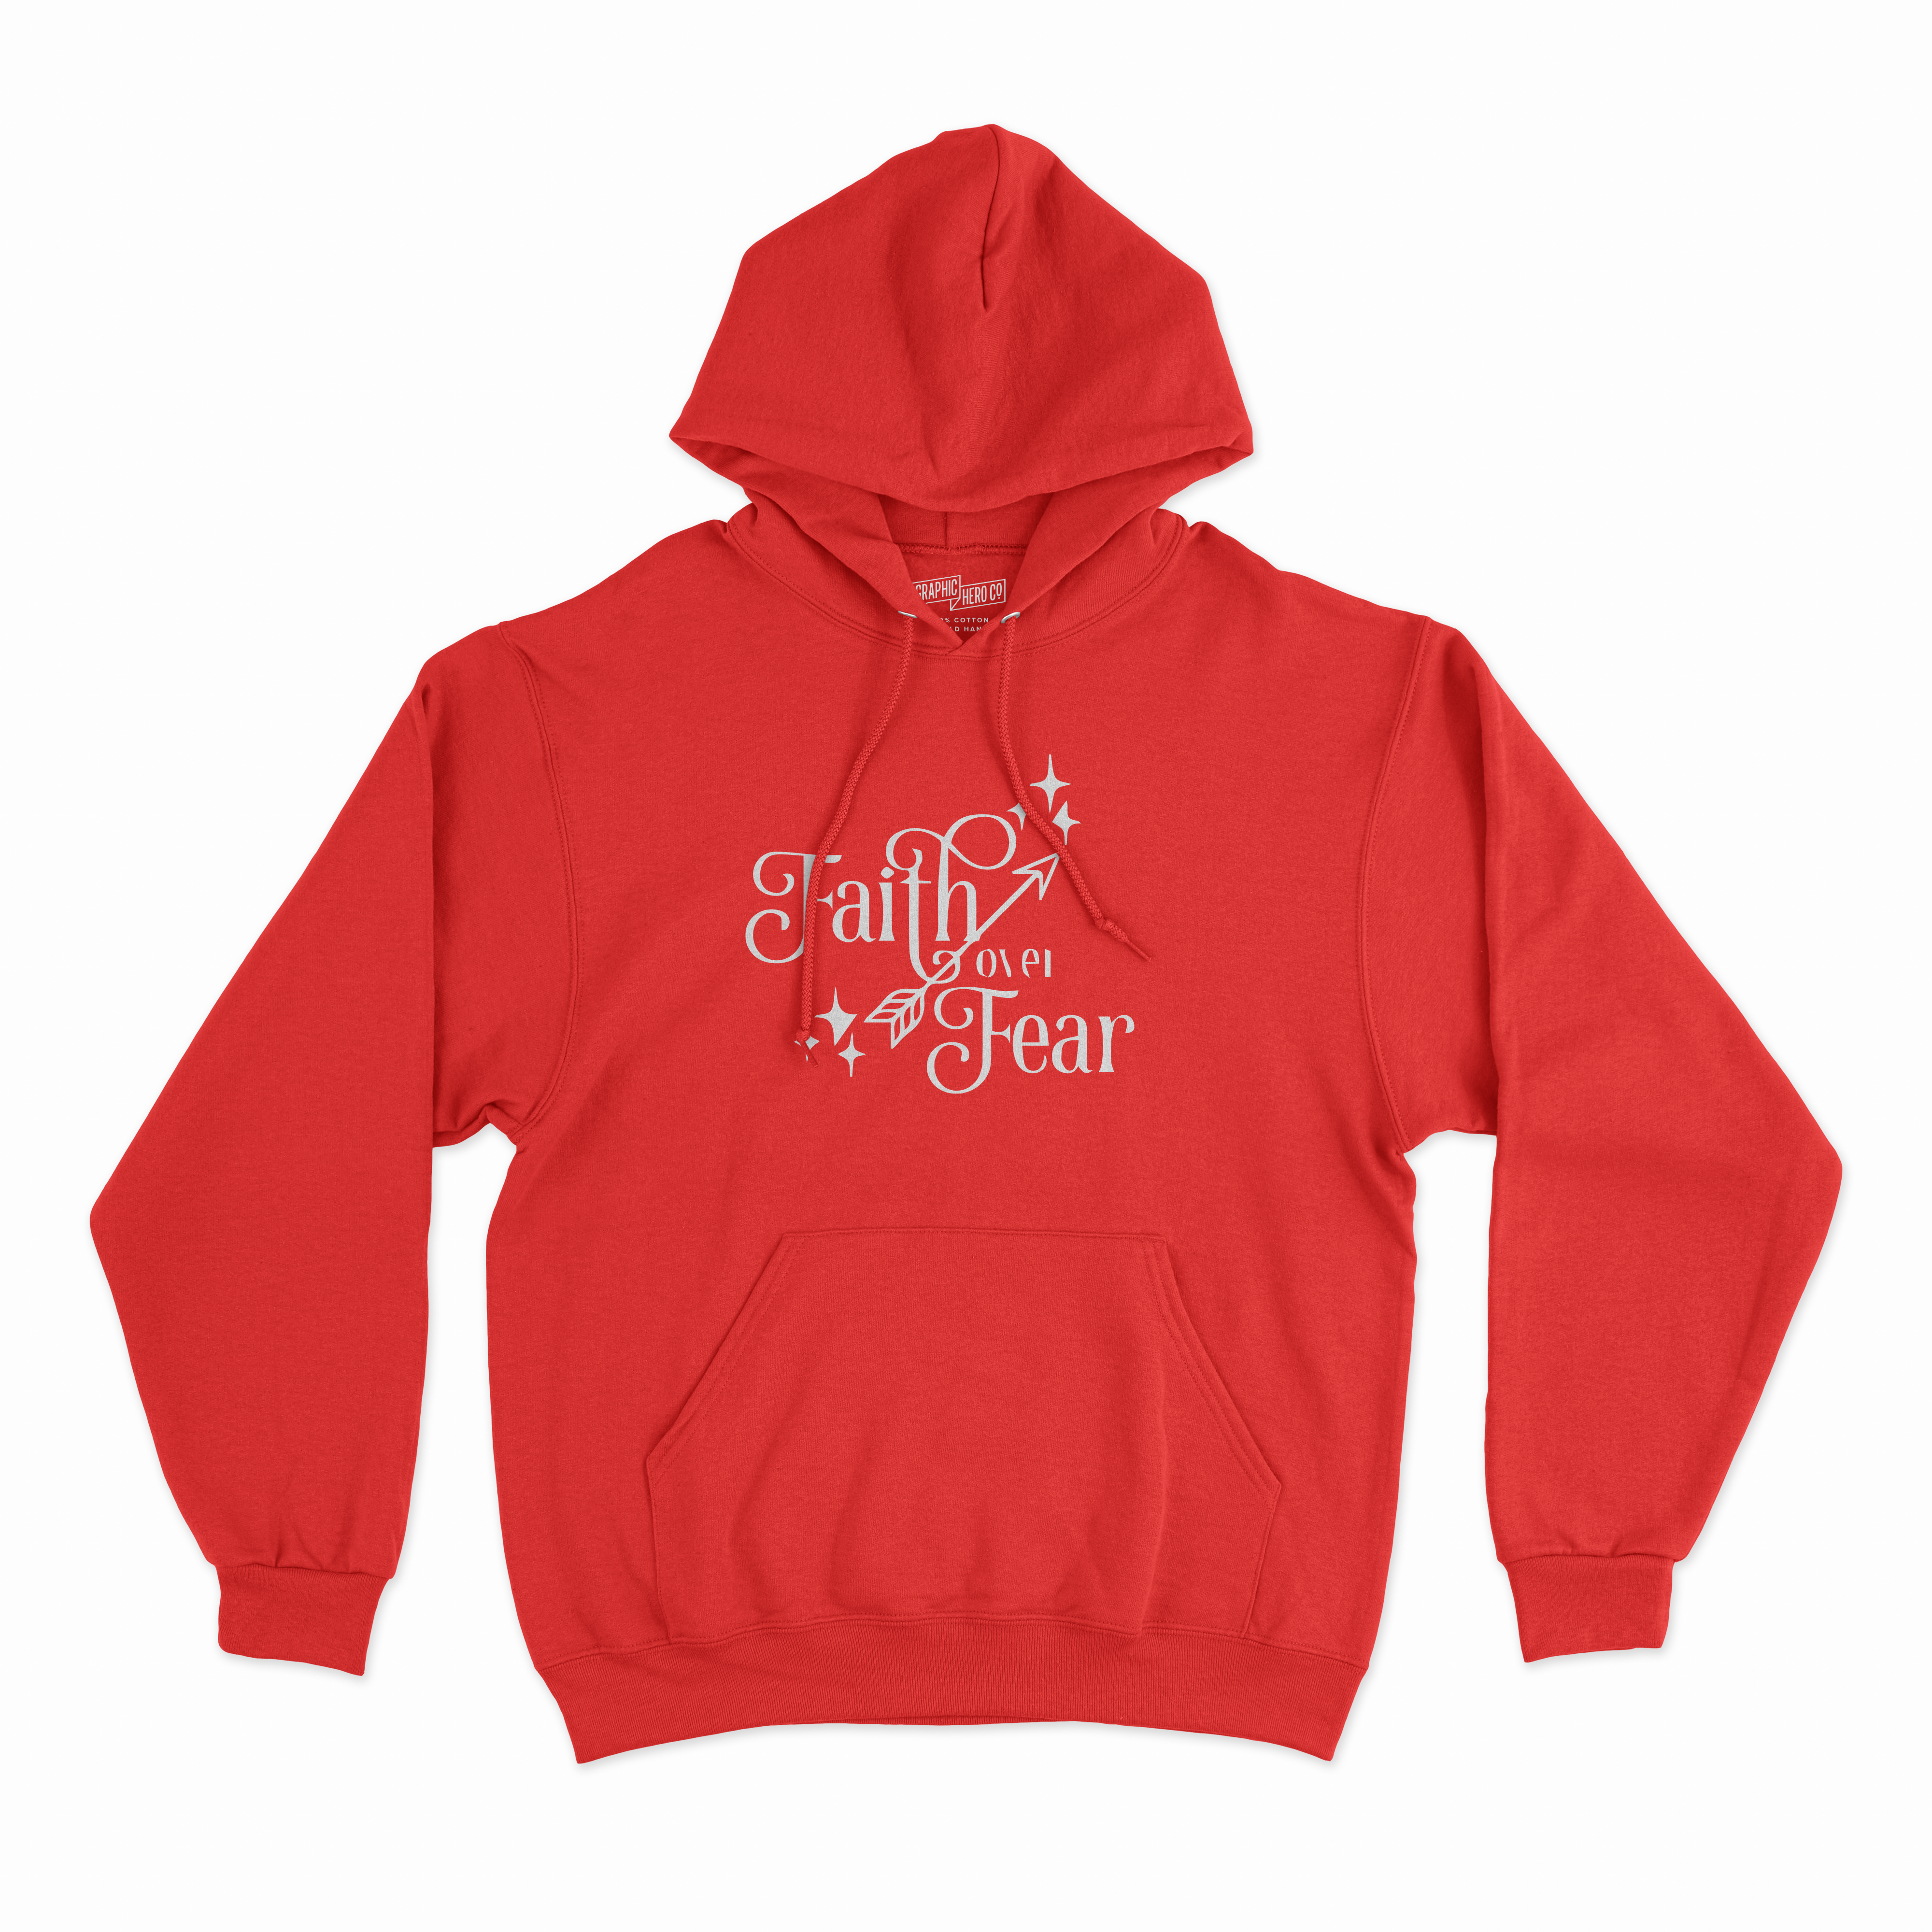 Personalized hoodies